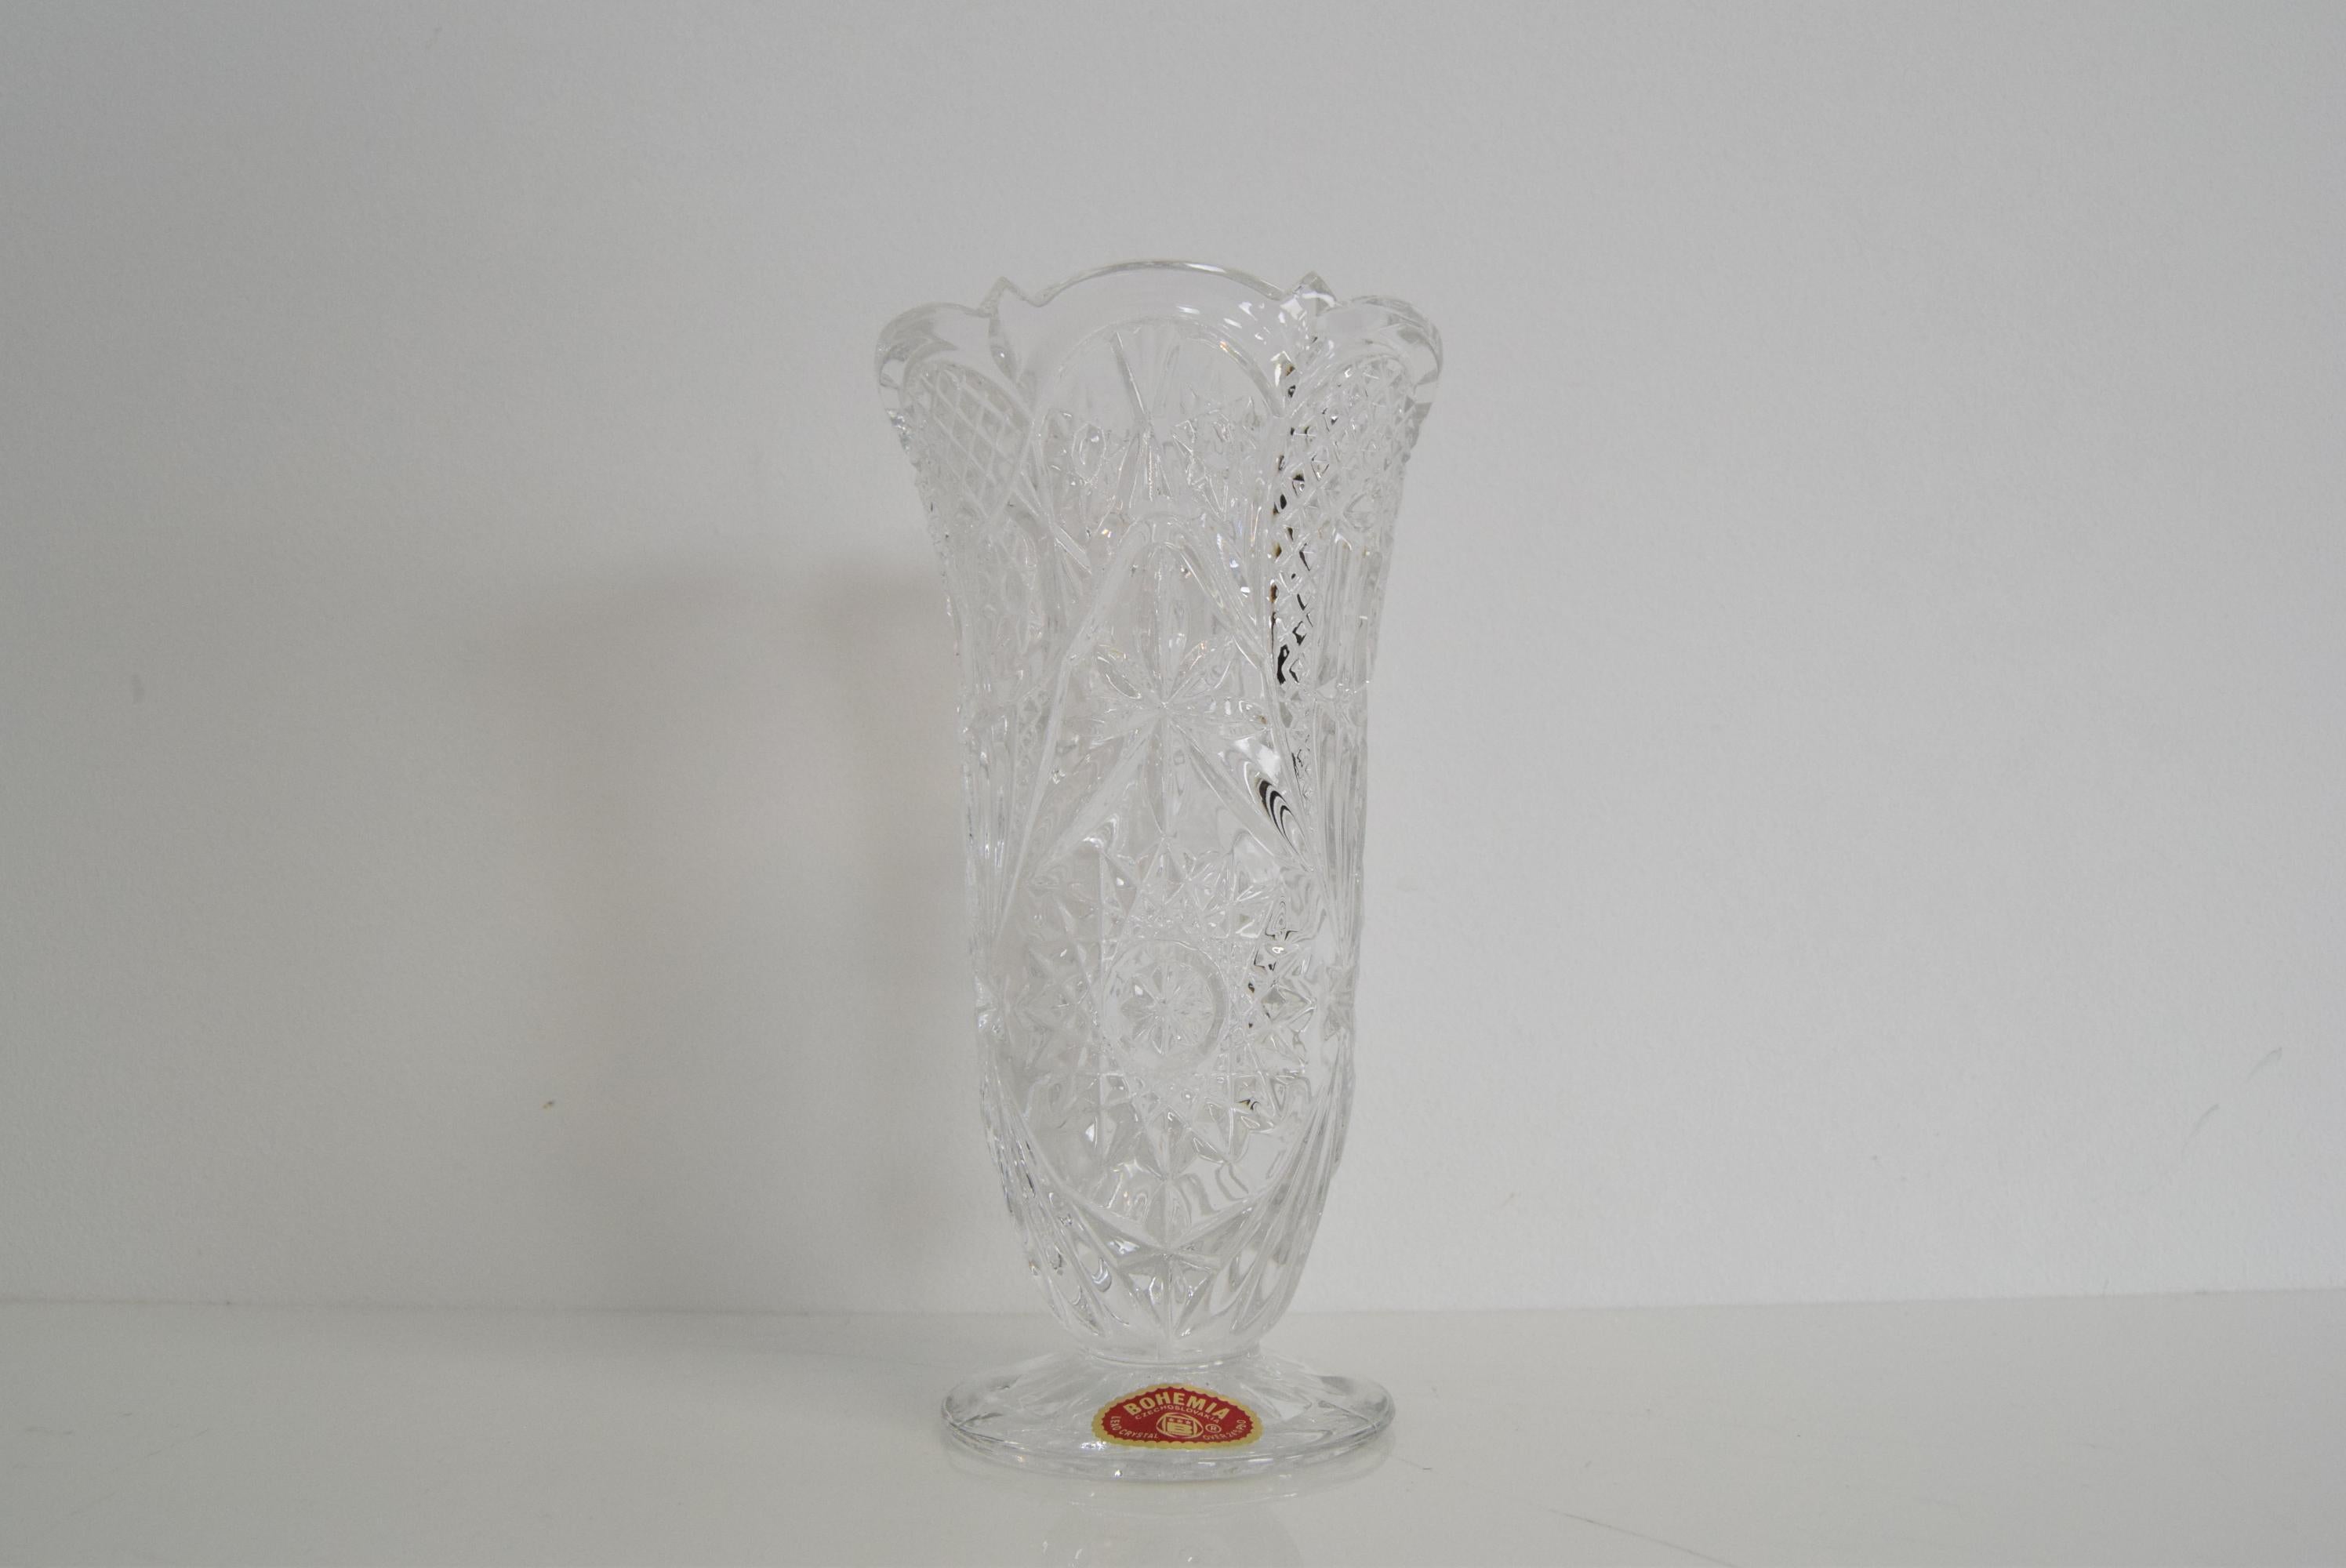 Made in Czechoslovakia
Made of lead crystal, glass
Labeled
Good original condition.
  